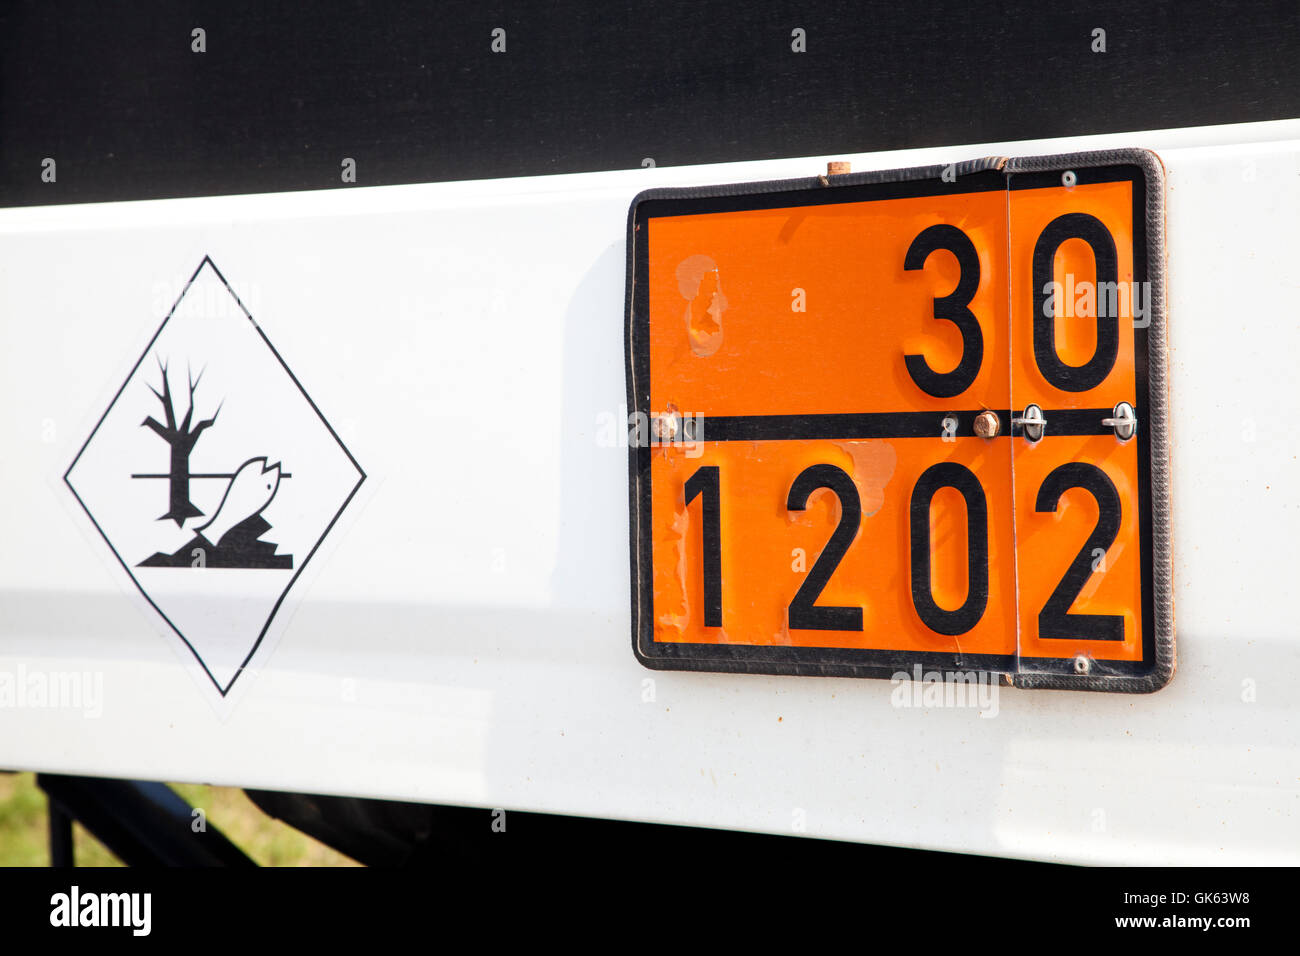 un hazard sign with the danger number 30 and hazardous substance number 1202 (hazardous substances Stock Photo